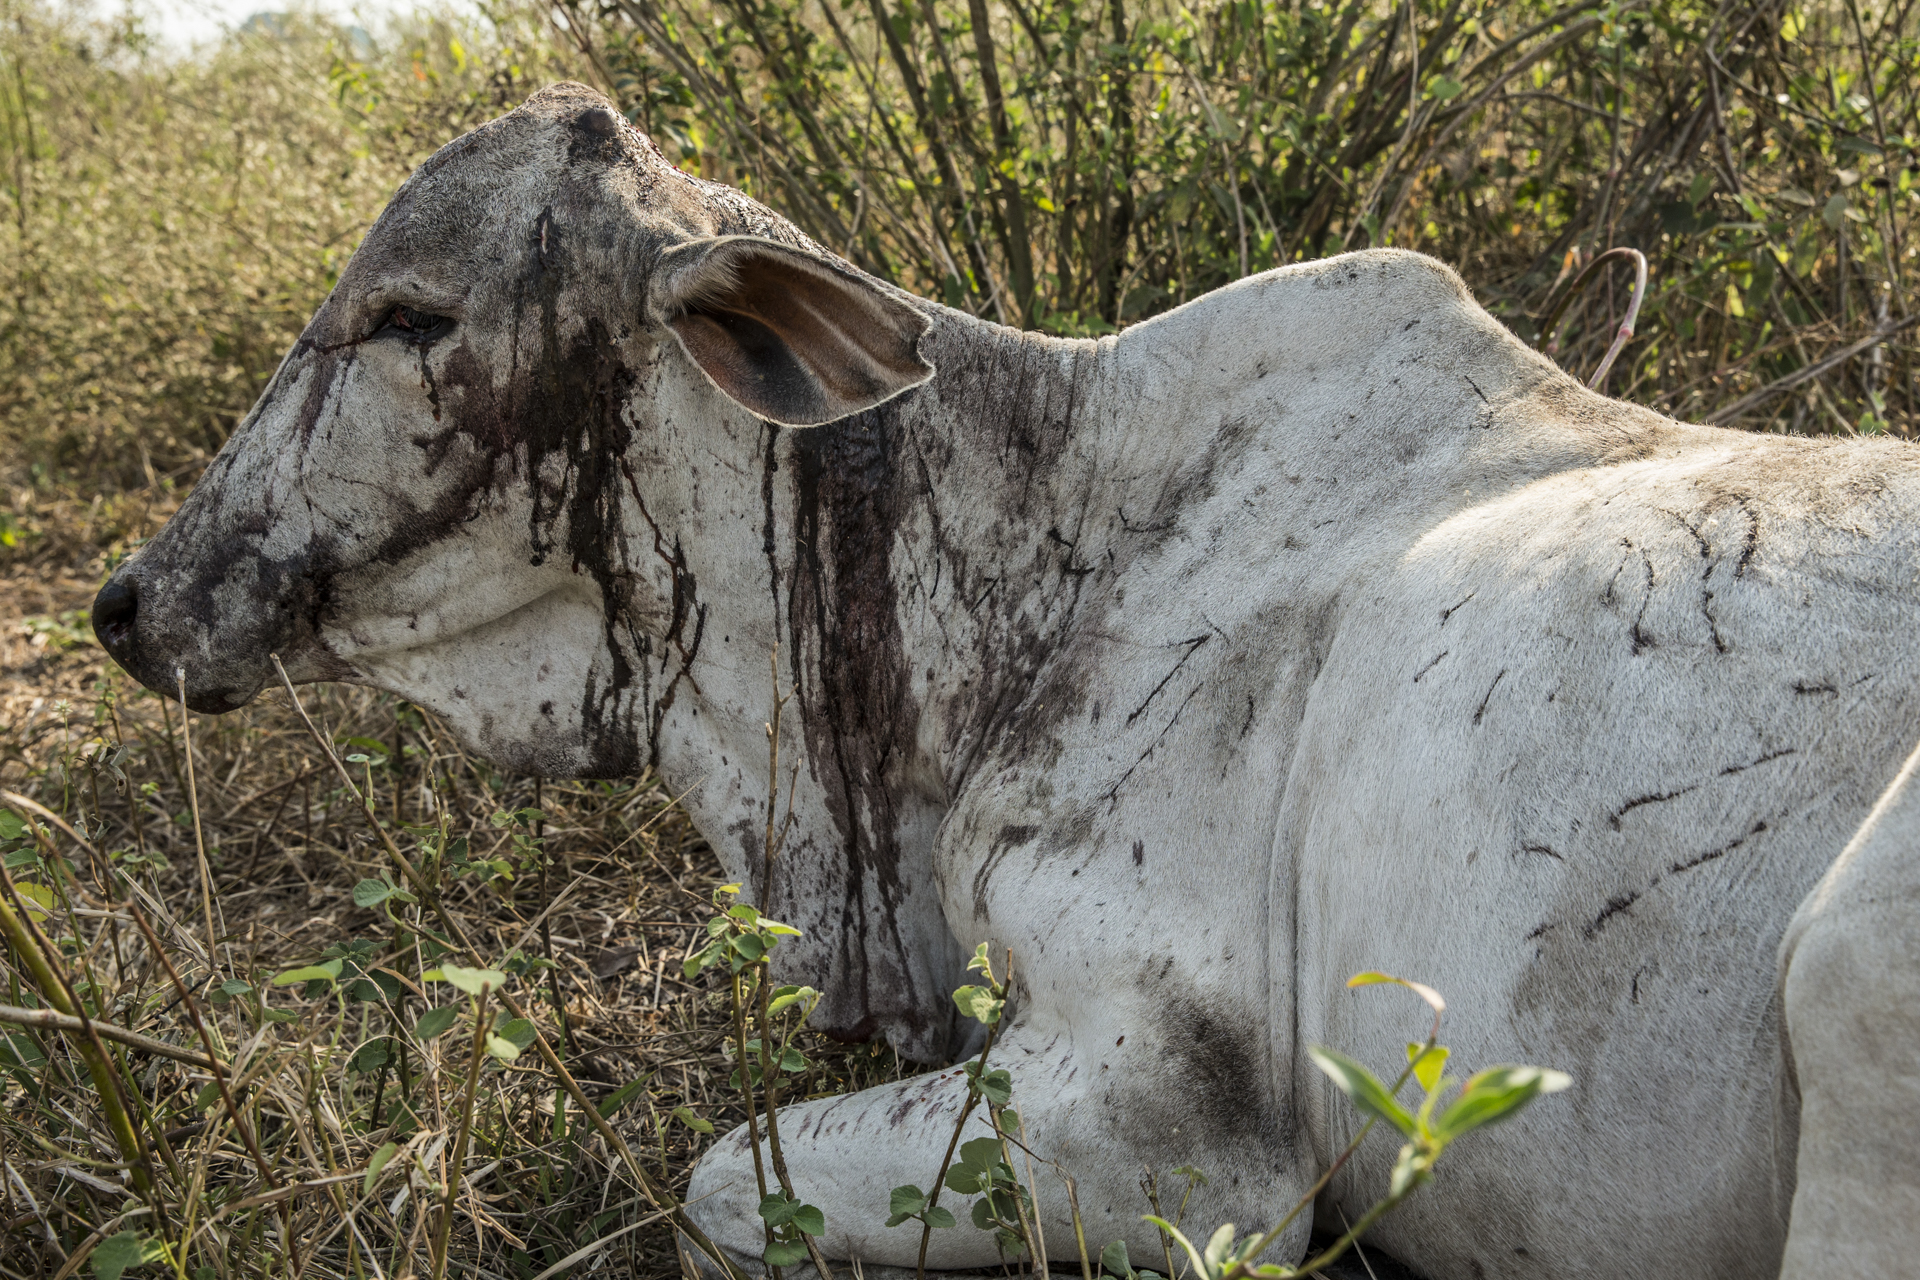  A cow, miraculously still alive after a jaguar attack.&nbsp; 